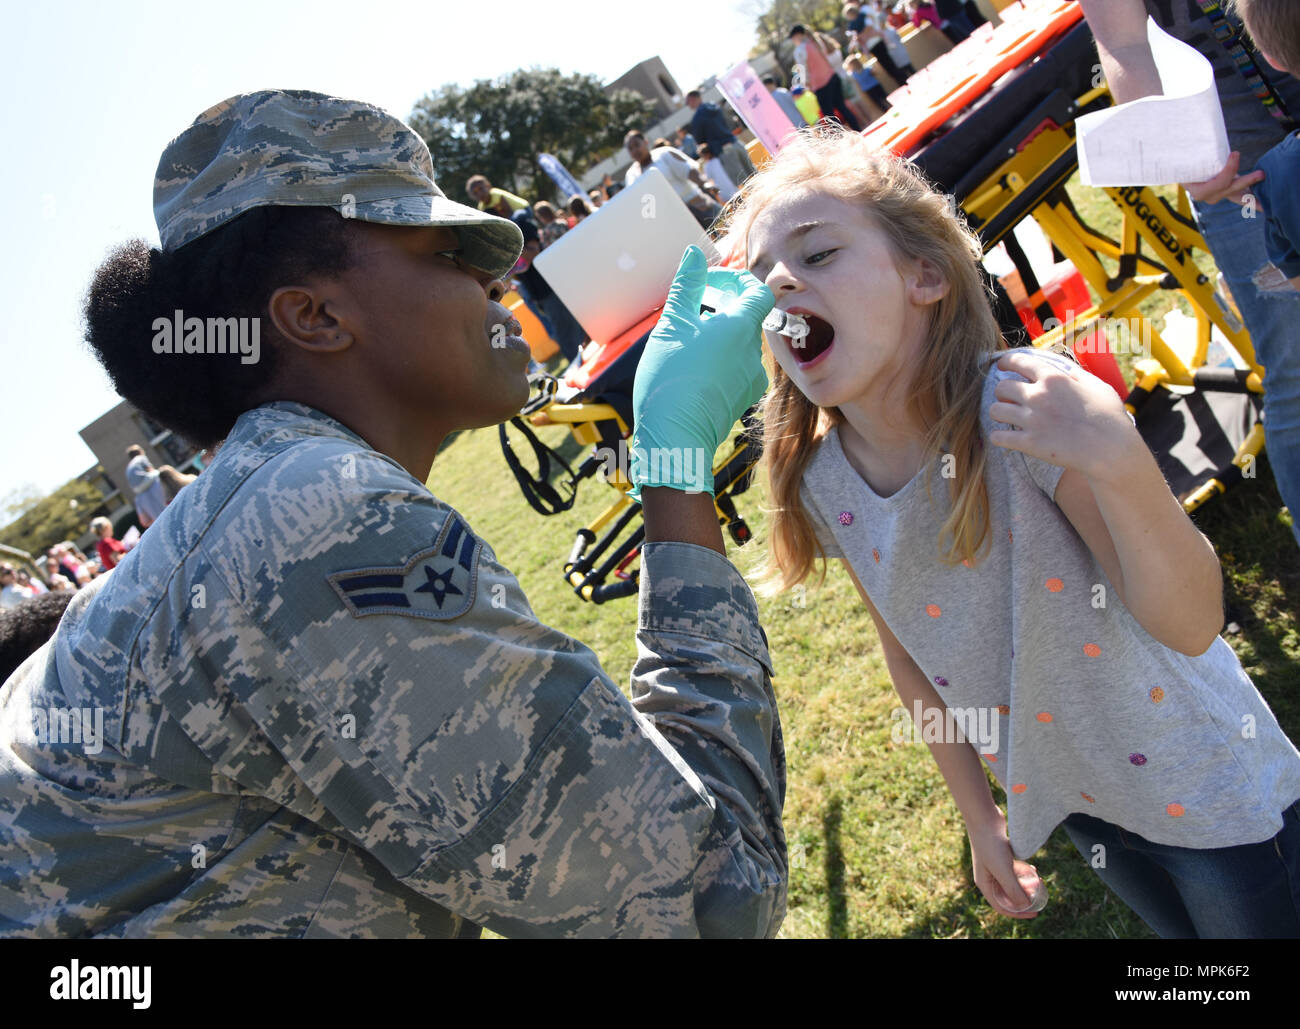 Airman 1st Class Chante Birdlong, 81st Medical Operations Squadron administration technician, administers juice to Madison Maxey, daughter of Kristen Maxey, during Operation Hero March 18, 2017, on Keesler Air Force Base, Miss. The activities at the event were designed to help children better understand what their parents do when they deploy. (U.S. Air Force photo by Kemberly Groue) Stock Photo